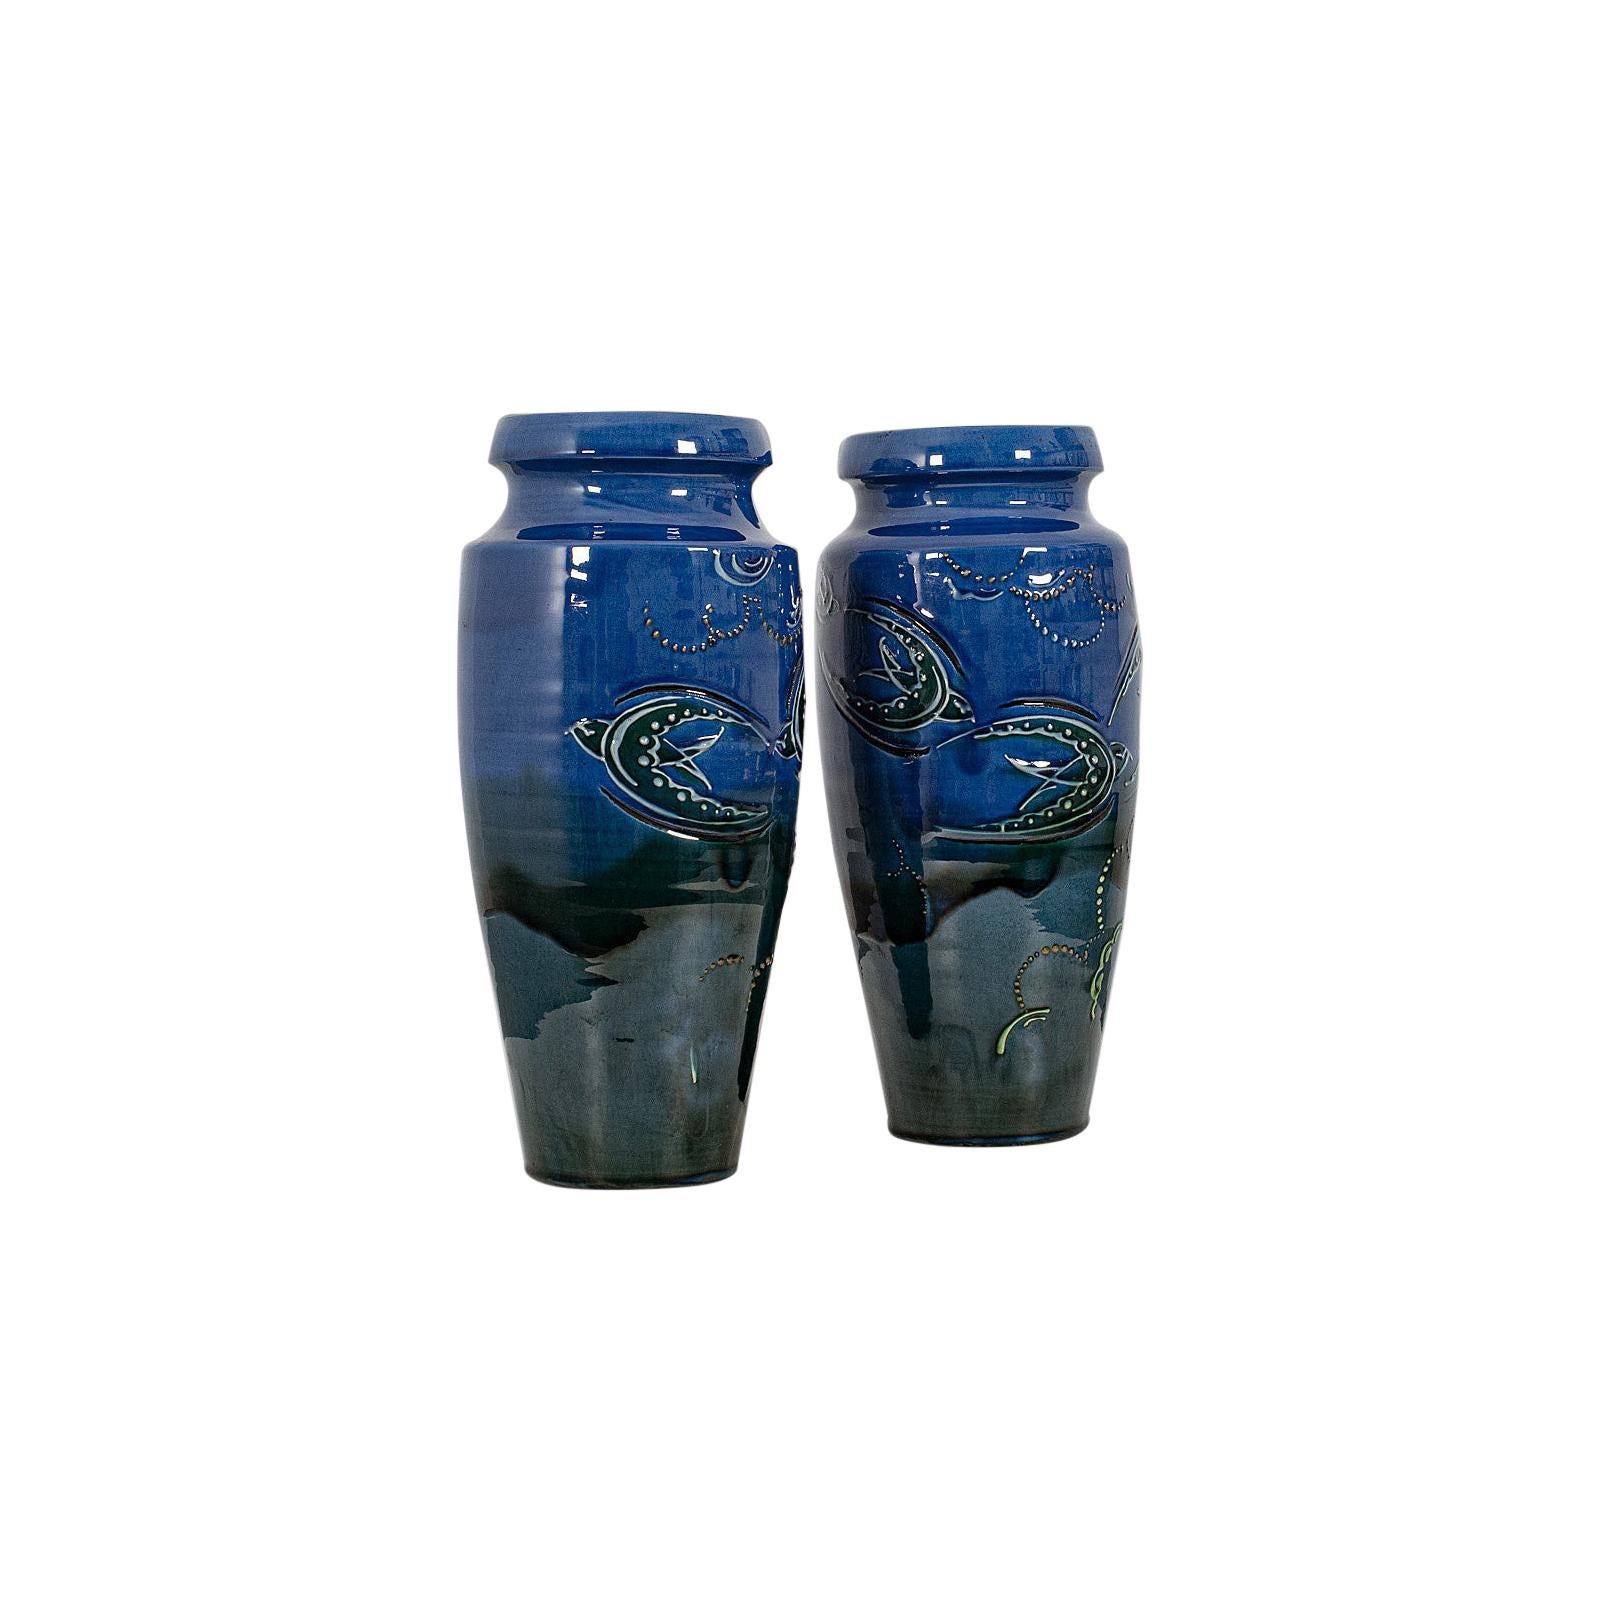 Pair of Vintage Decorative Flower Vases English Ceramic Hand Painted, circa 1930 For Sale